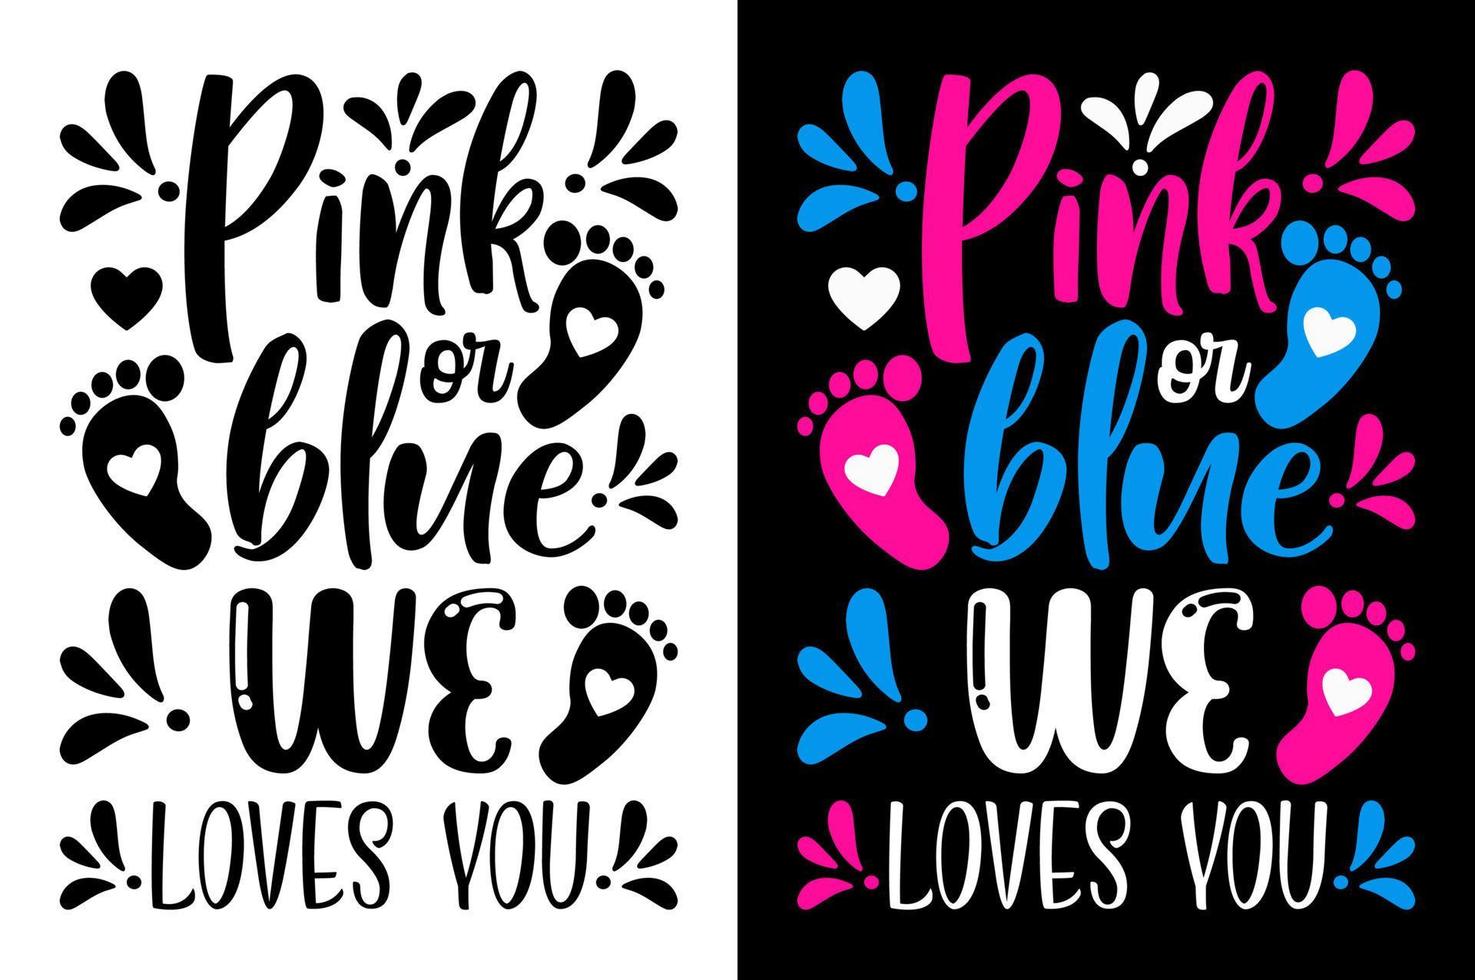 Pink Or Blue We Loves You T Shirt Gender Reveal Baby TShirt inspirational quotes typography lettering design vector